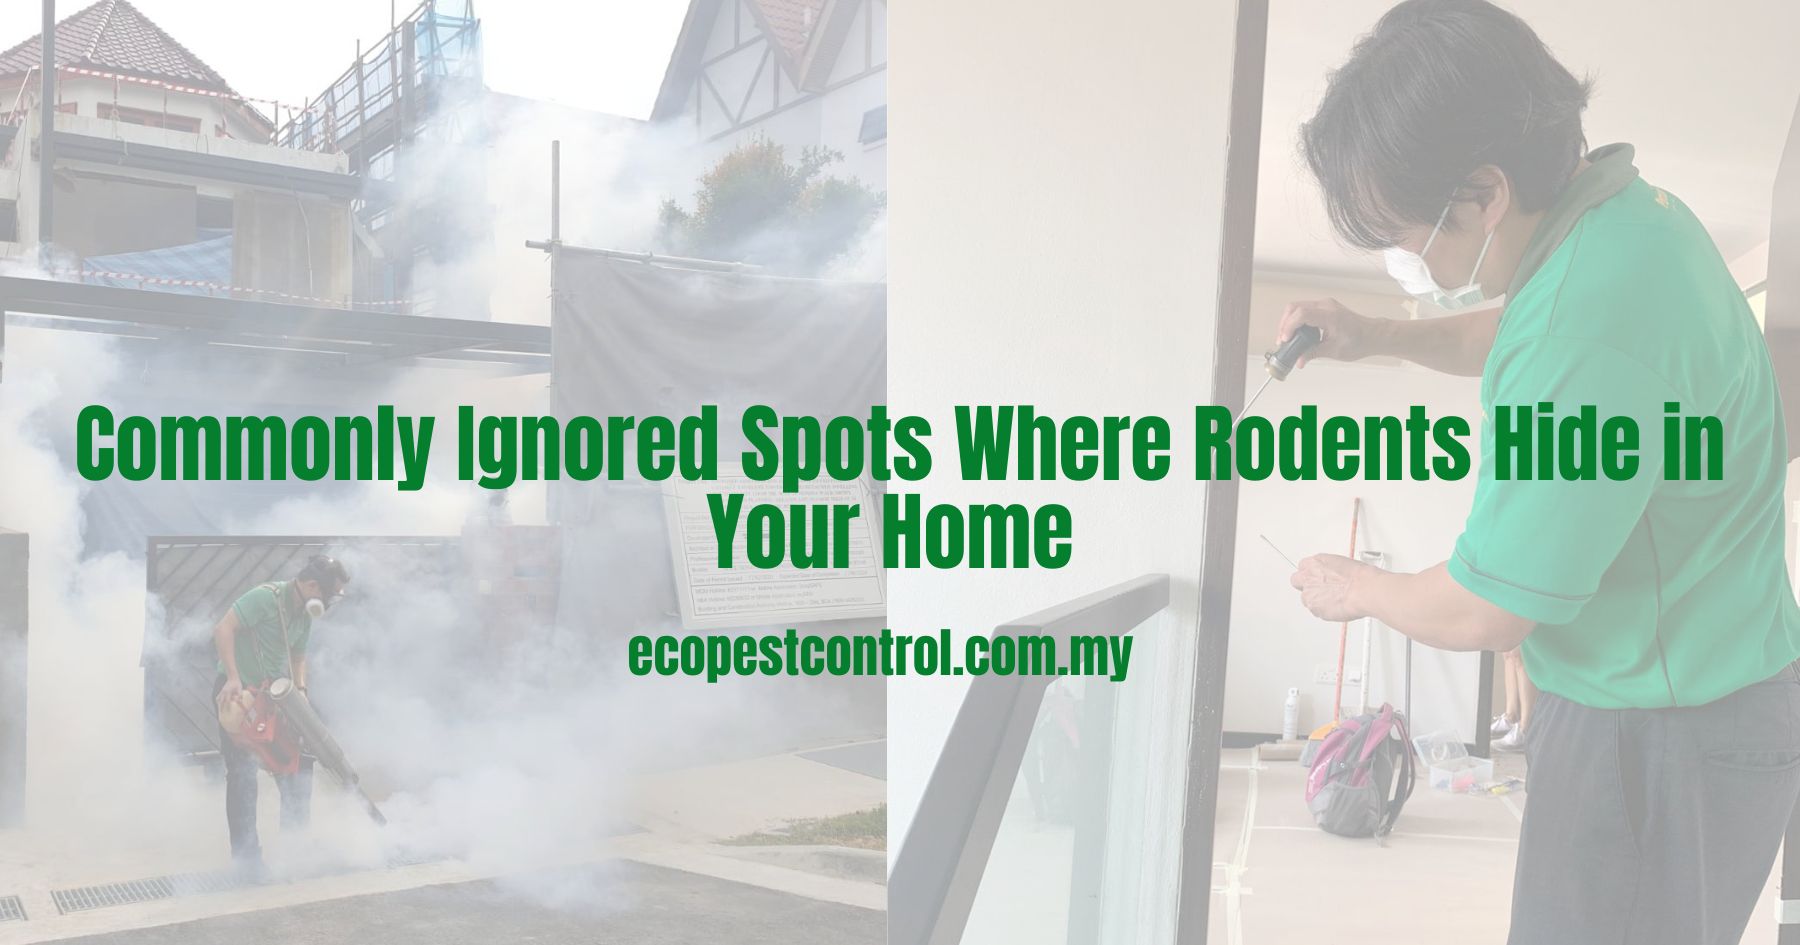 Commonly Ignored Spots Where Rodents Hide in Your Home